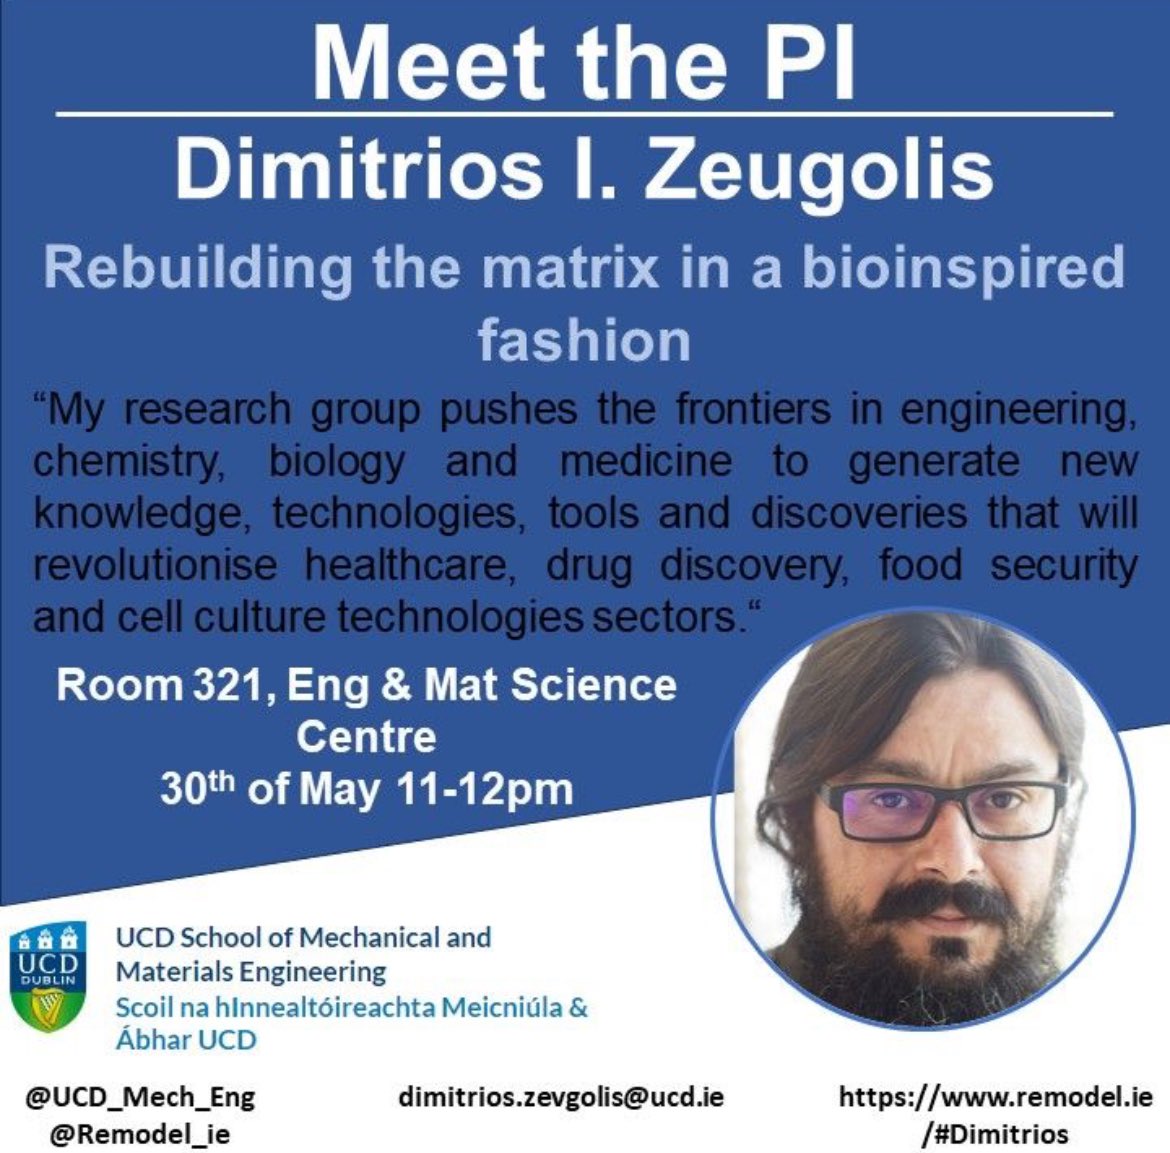 Next in our #MeetTheProf Research Seminar is Dimitrios Zeugolis @REMODEL_IE. Dimitrios will be discussing “Rebuilding the matrix in a bioinspired fashion” May 30th 11-12pm. #bioinspiredmaterials #futurematerials #novelbiomaterials #healthcare #foodsecurity #cellculturetechnologie